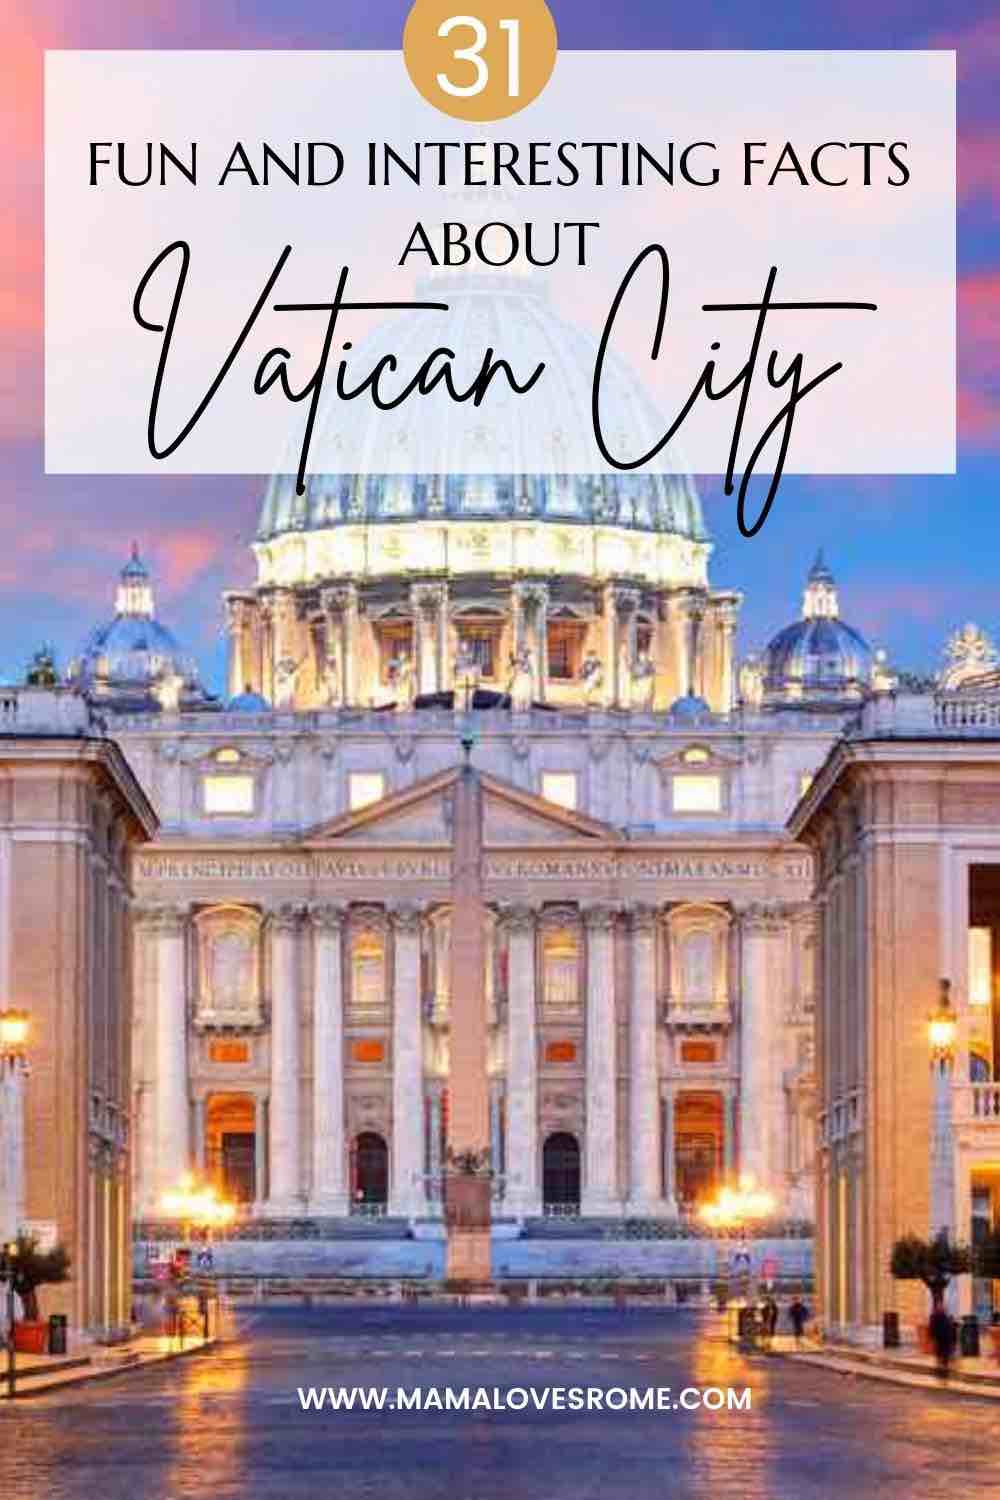 St Peter's Basilica at dusk with text: 31 fun and interesting facts about Vatican City